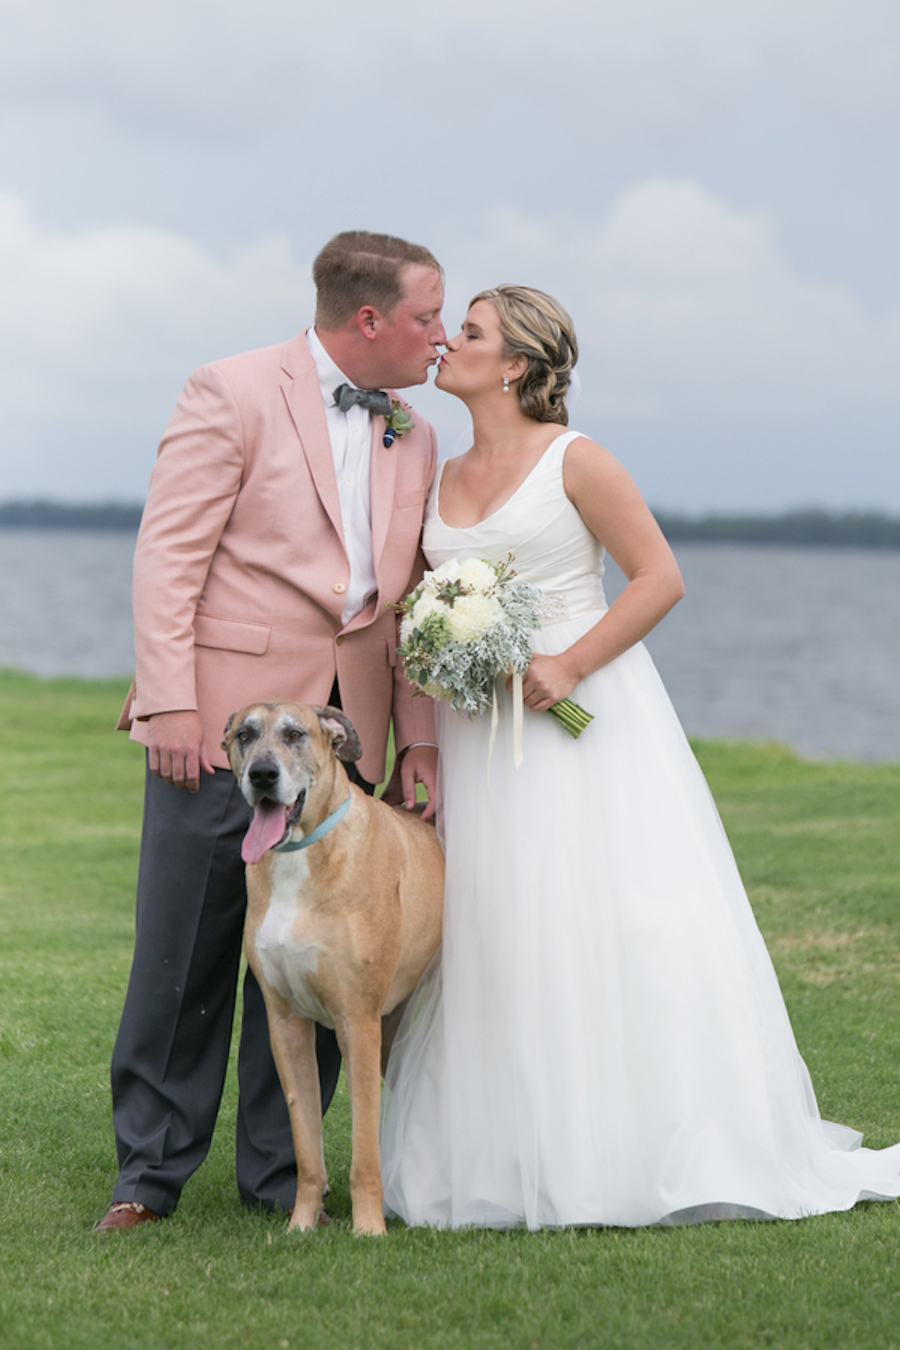 Florida Bride and Groom Wedding Portrait with Dog | Outdoor, Waterfront Florida Bride and Groom First Look | Tampa Wedding Photographer Carrie Wildes Photography